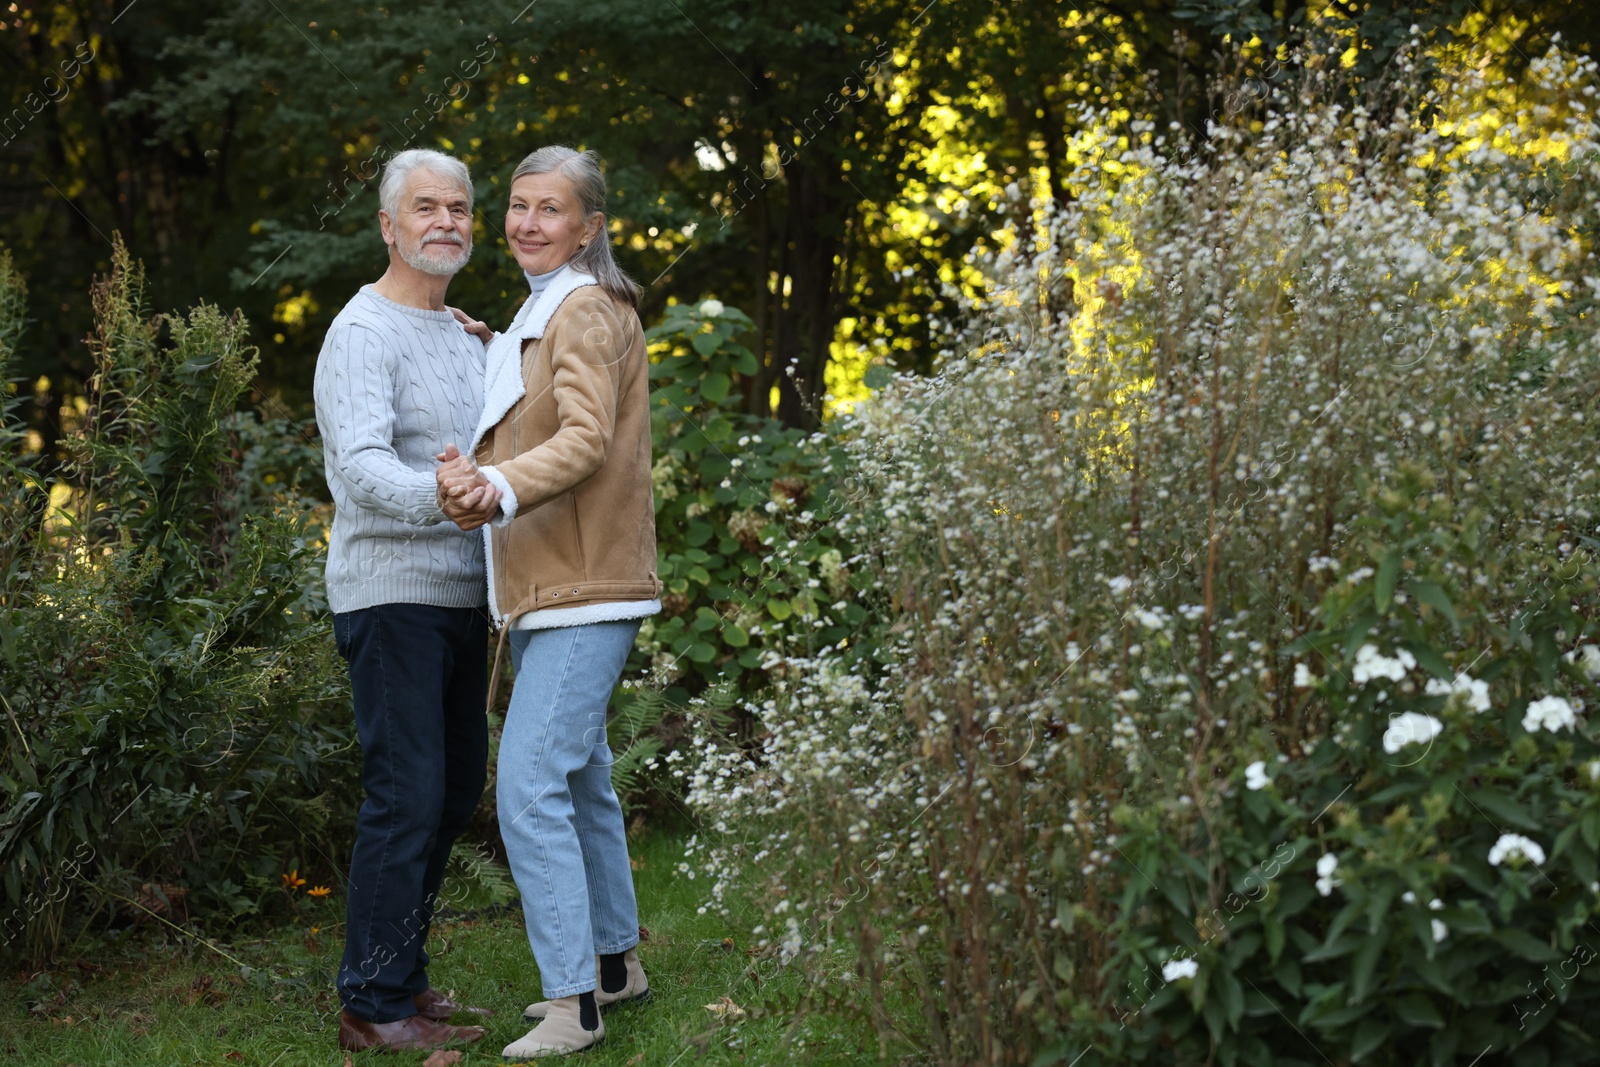 Photo of Affectionate senior couple dancing together in park, space for text